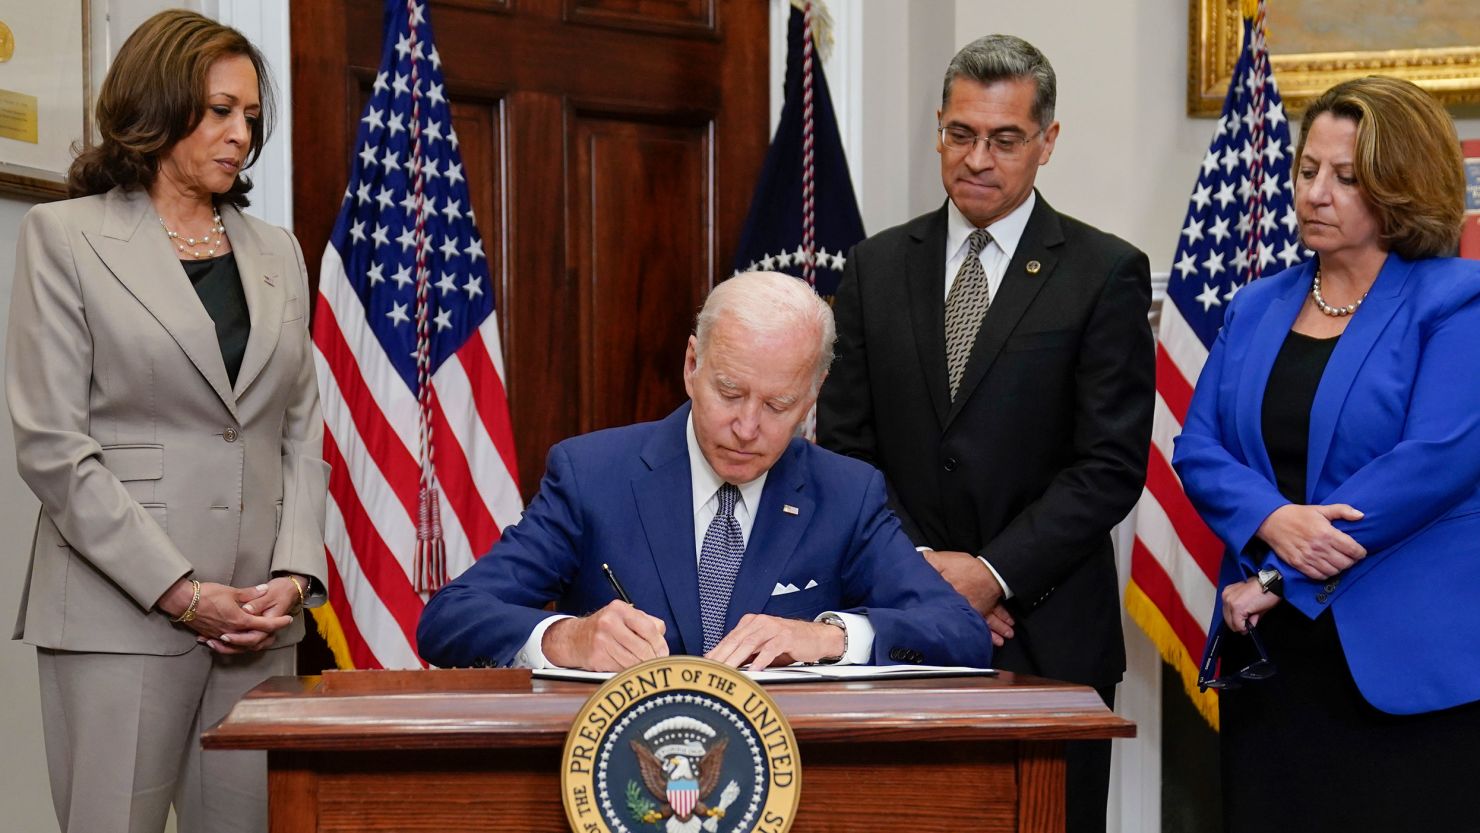 President Joe Biden signs an executive order on abortion access during an event in the Roosevelt Room of the White House, July 8, 2022, in Washington.